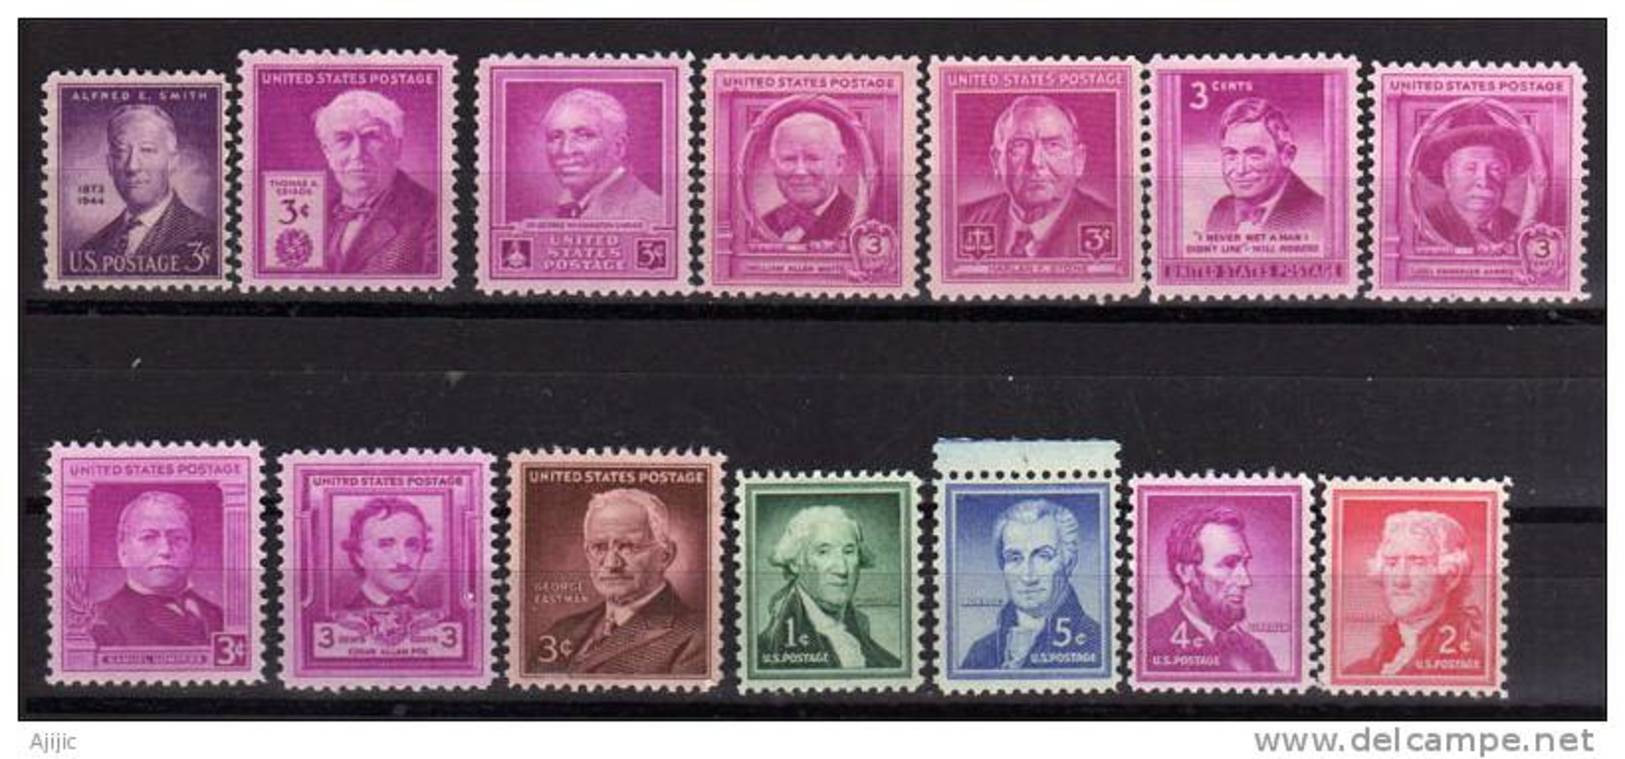 Personnalites Americaines (Edgar A.Poe,Jefferson,Lincoln,James Monroe,Will Rogers,etc) 14 T-p Neufs ** - Neufs